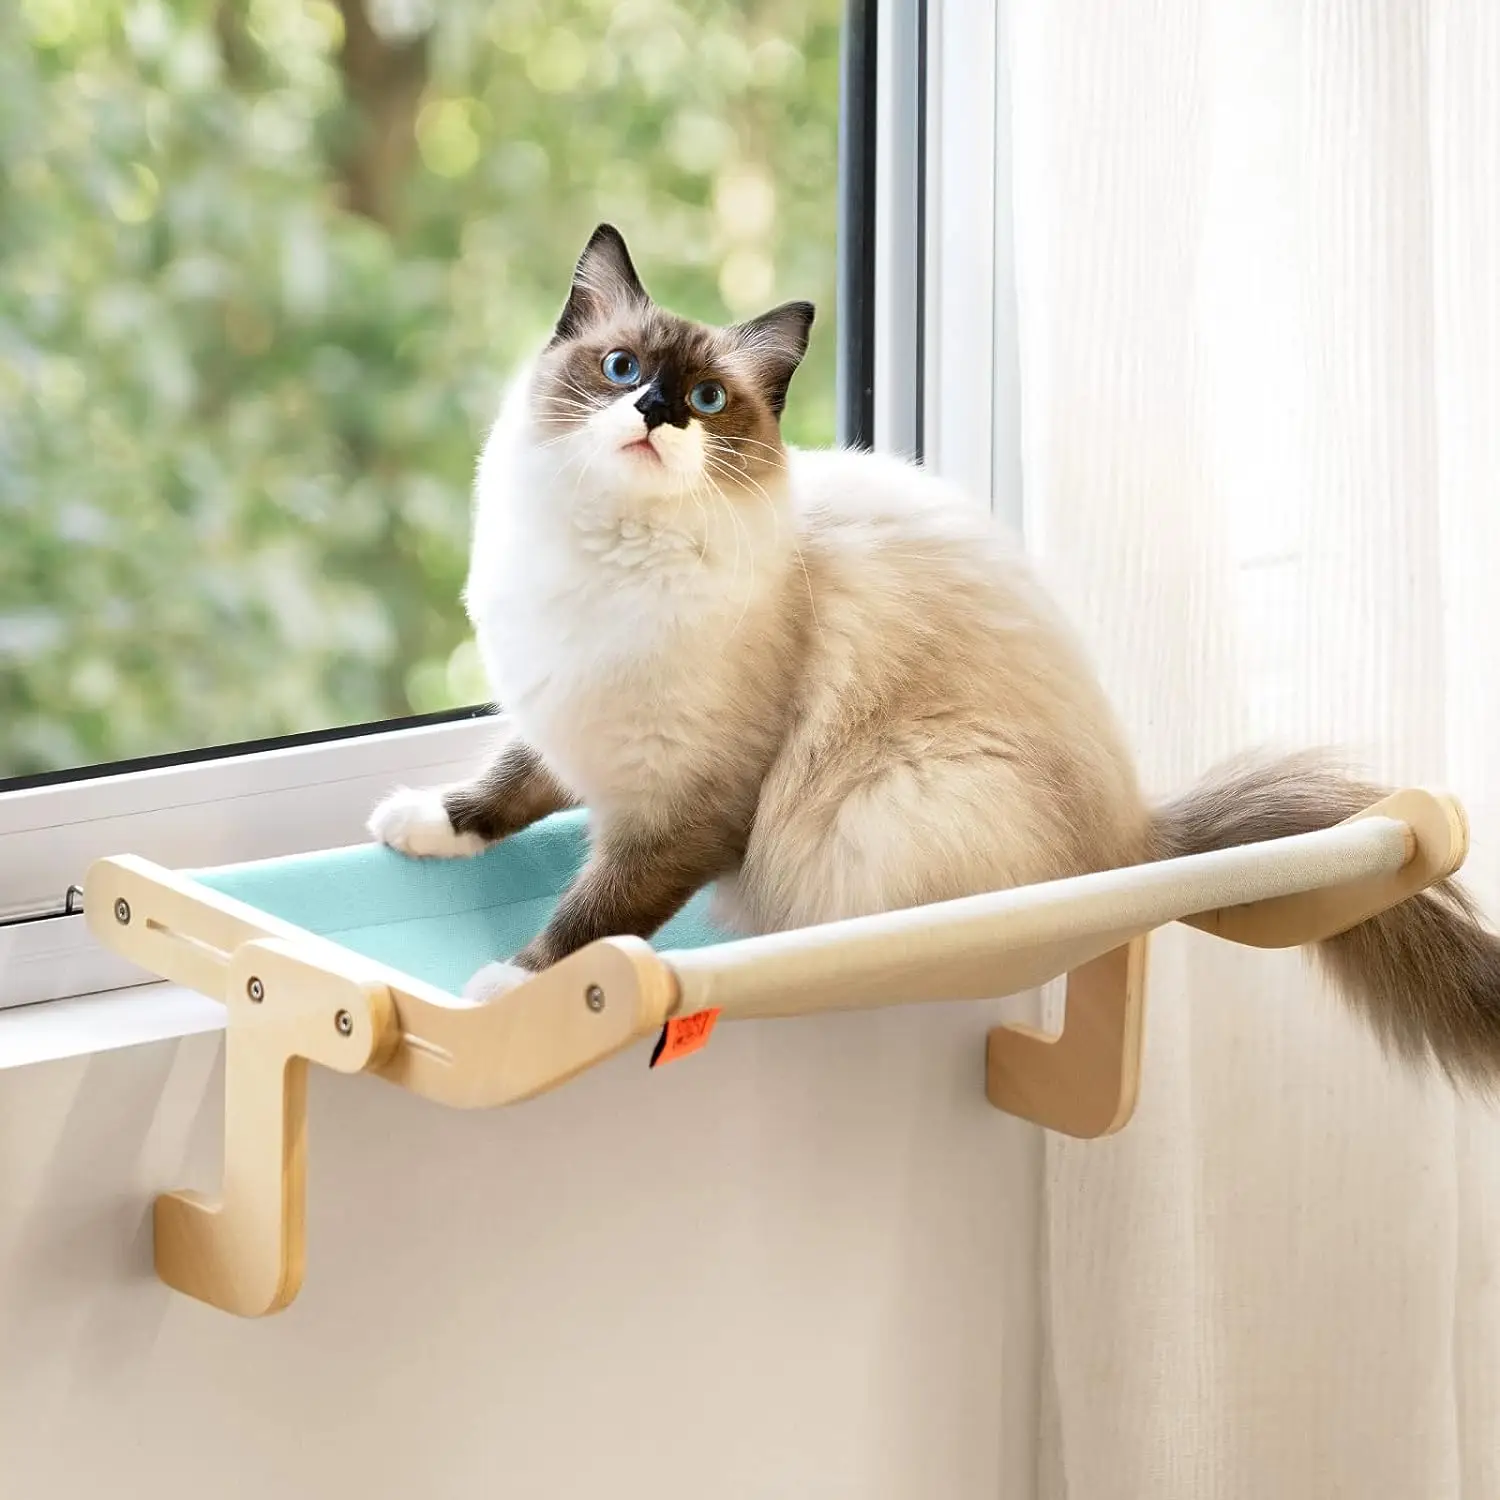 MEWOOFUN Cat Window Perch Cat Window Hammock Seat for Indoor Cats Sturdy Adjustable Durable Steady Cat Bed Providing All-Around